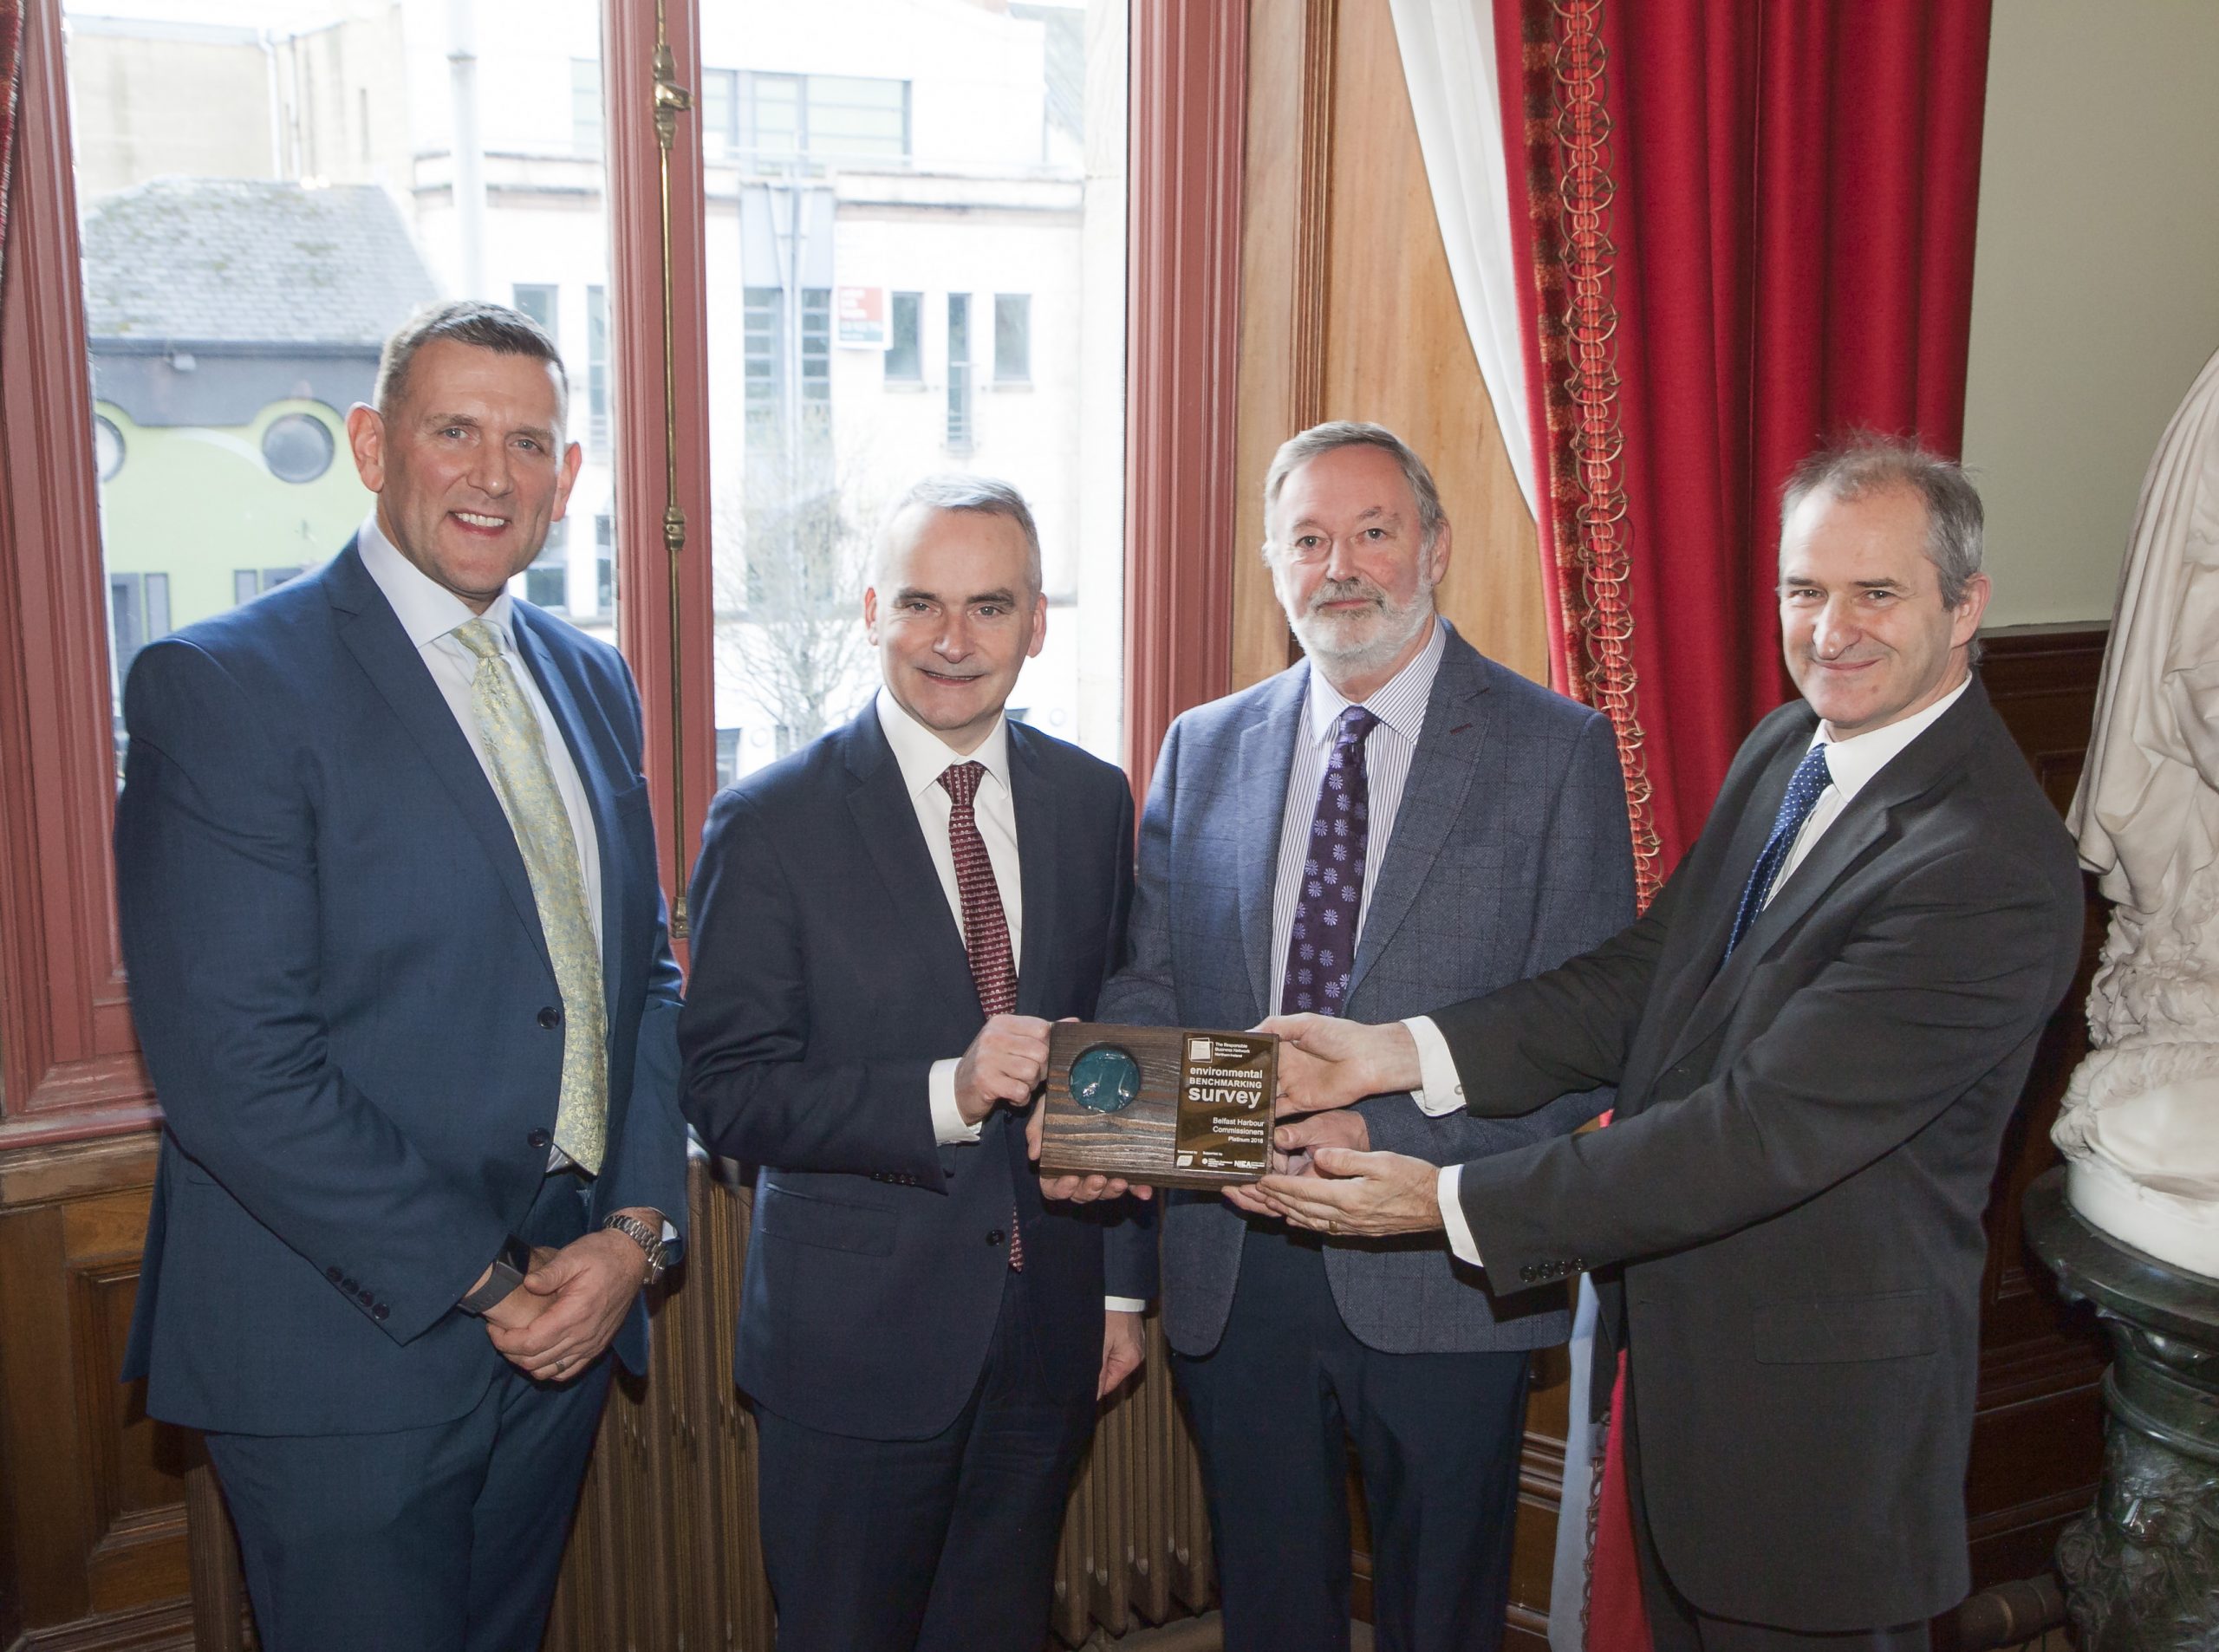 Belfast Harbour Named As One of Northern Ireland's Top Companies for Environmental Leadership